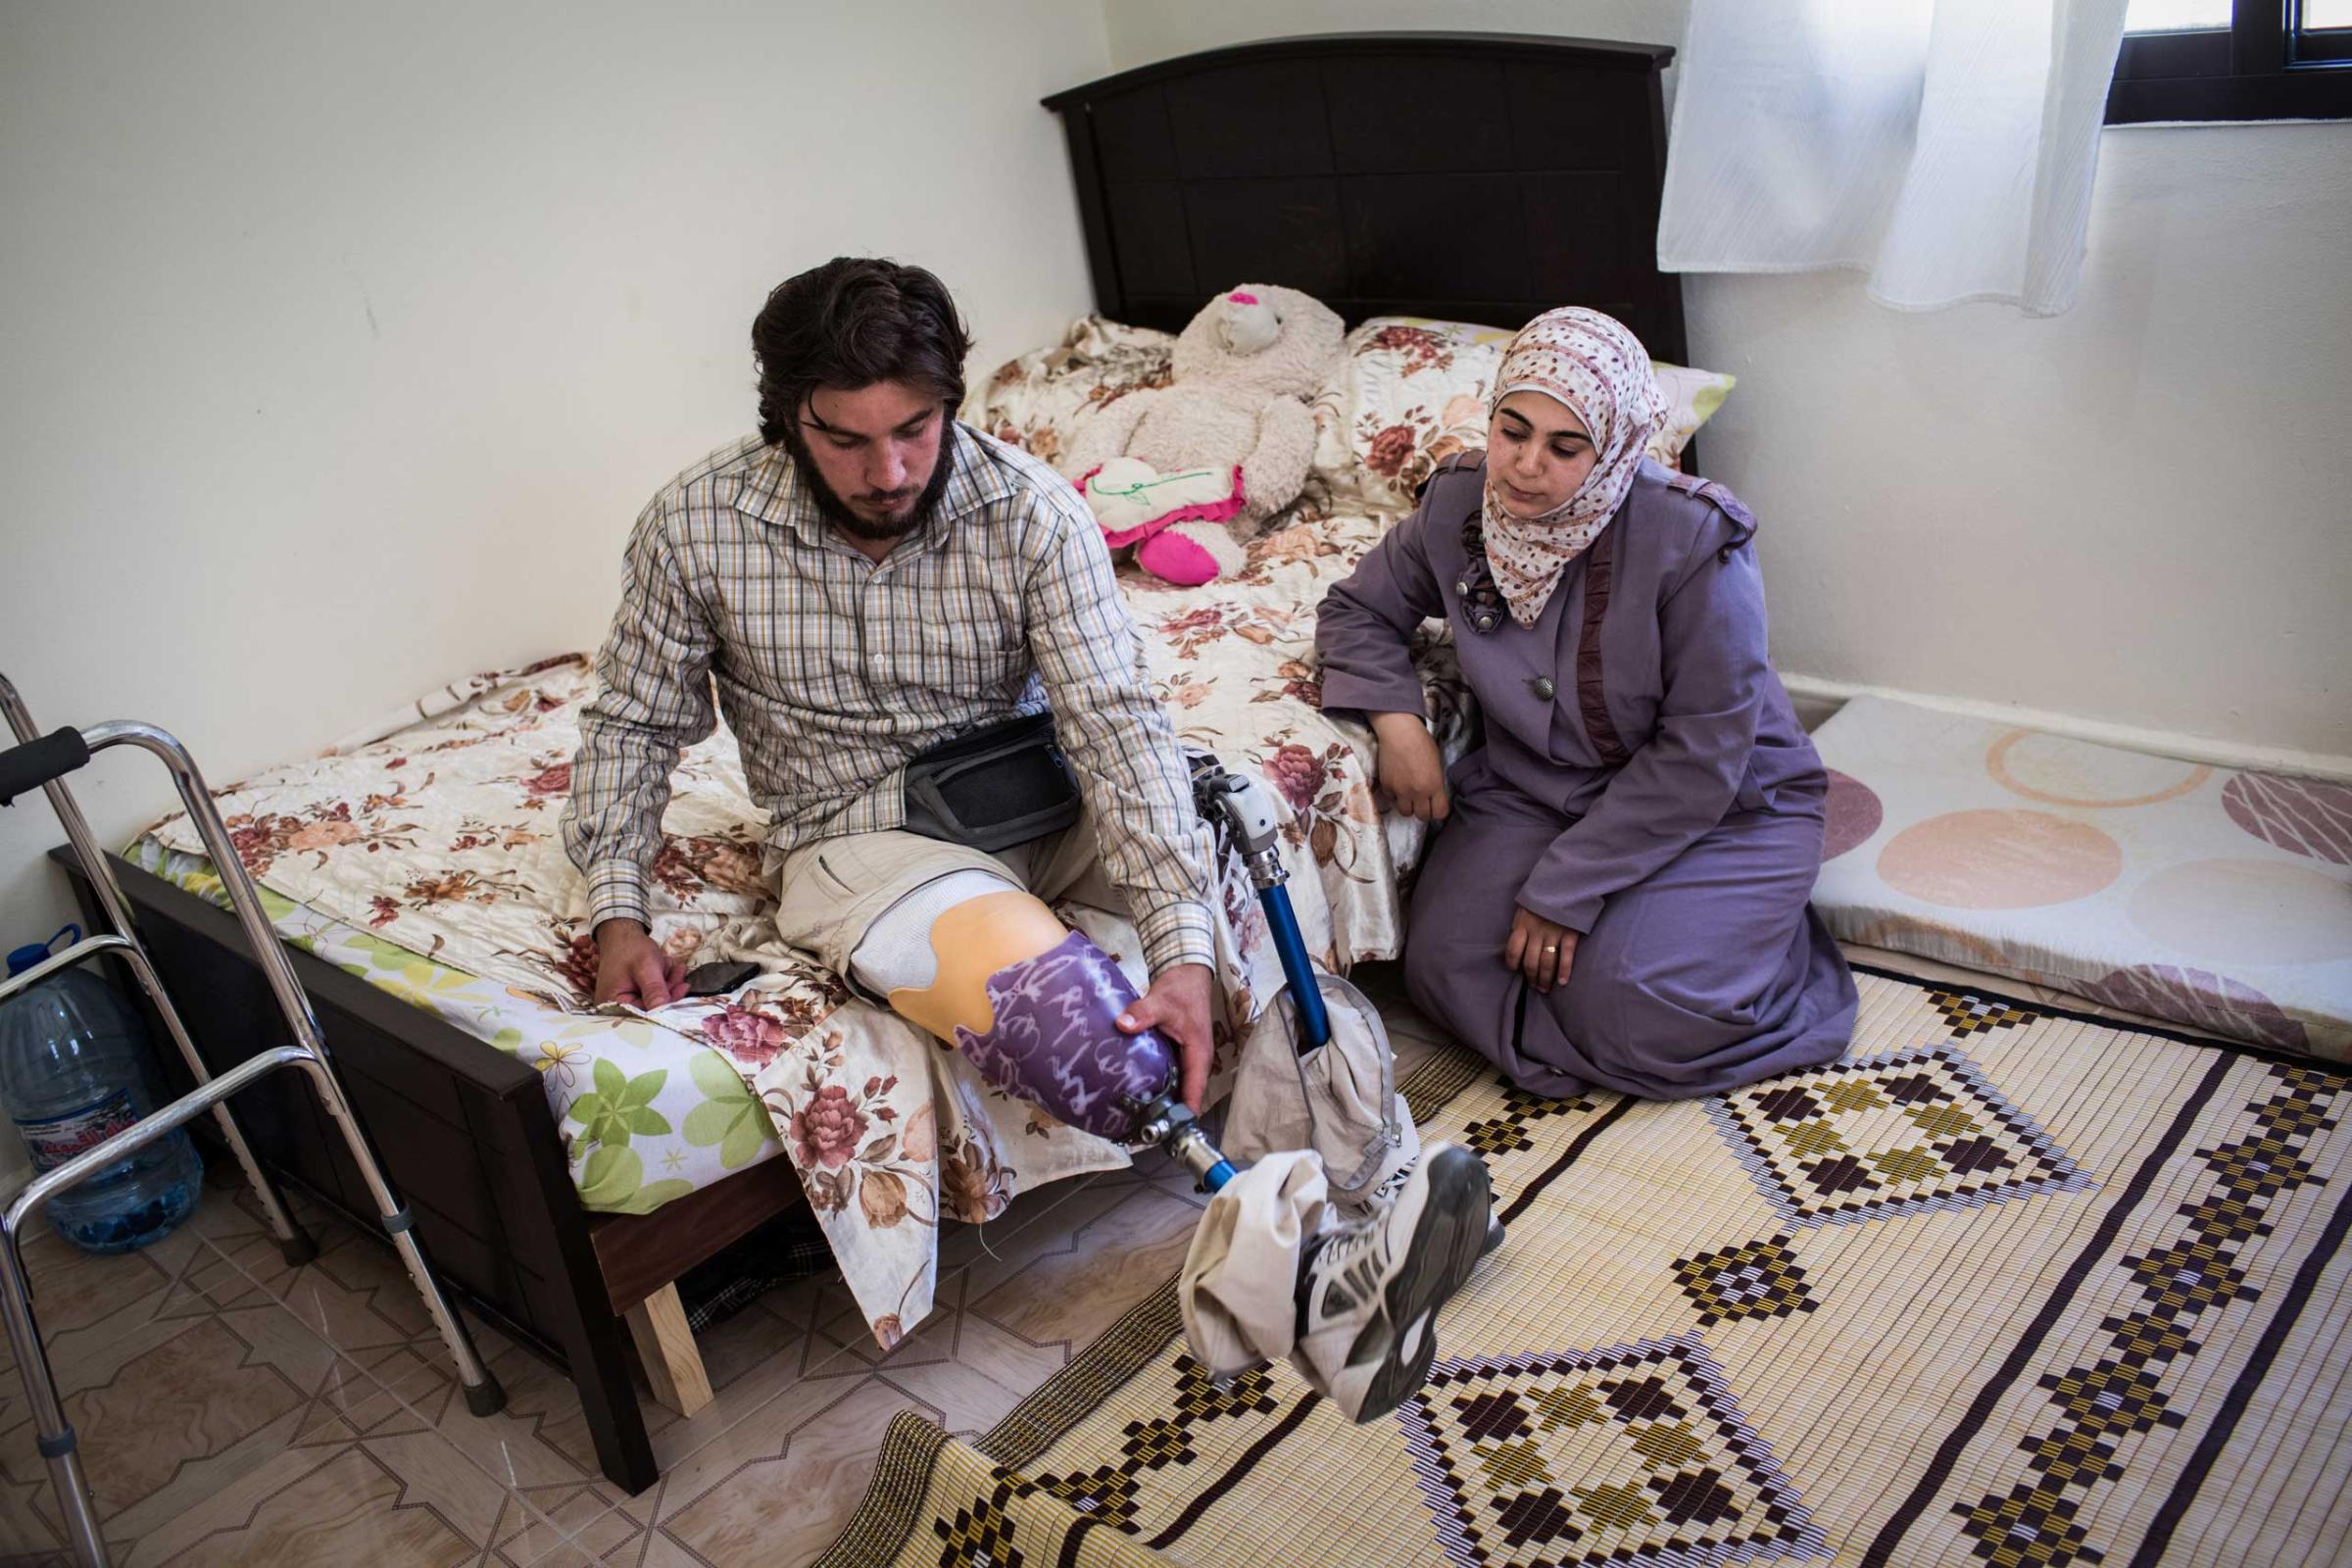 Ahmad, 29, fits his prosthetic with the help of his wife, Lazmiah, at their home in Tripoli, Lebanon, June 17, 2014. Ahmad lost both legs after a mortar attack near his home in Zabadane, Syria. He and his wife volunteer in the area.